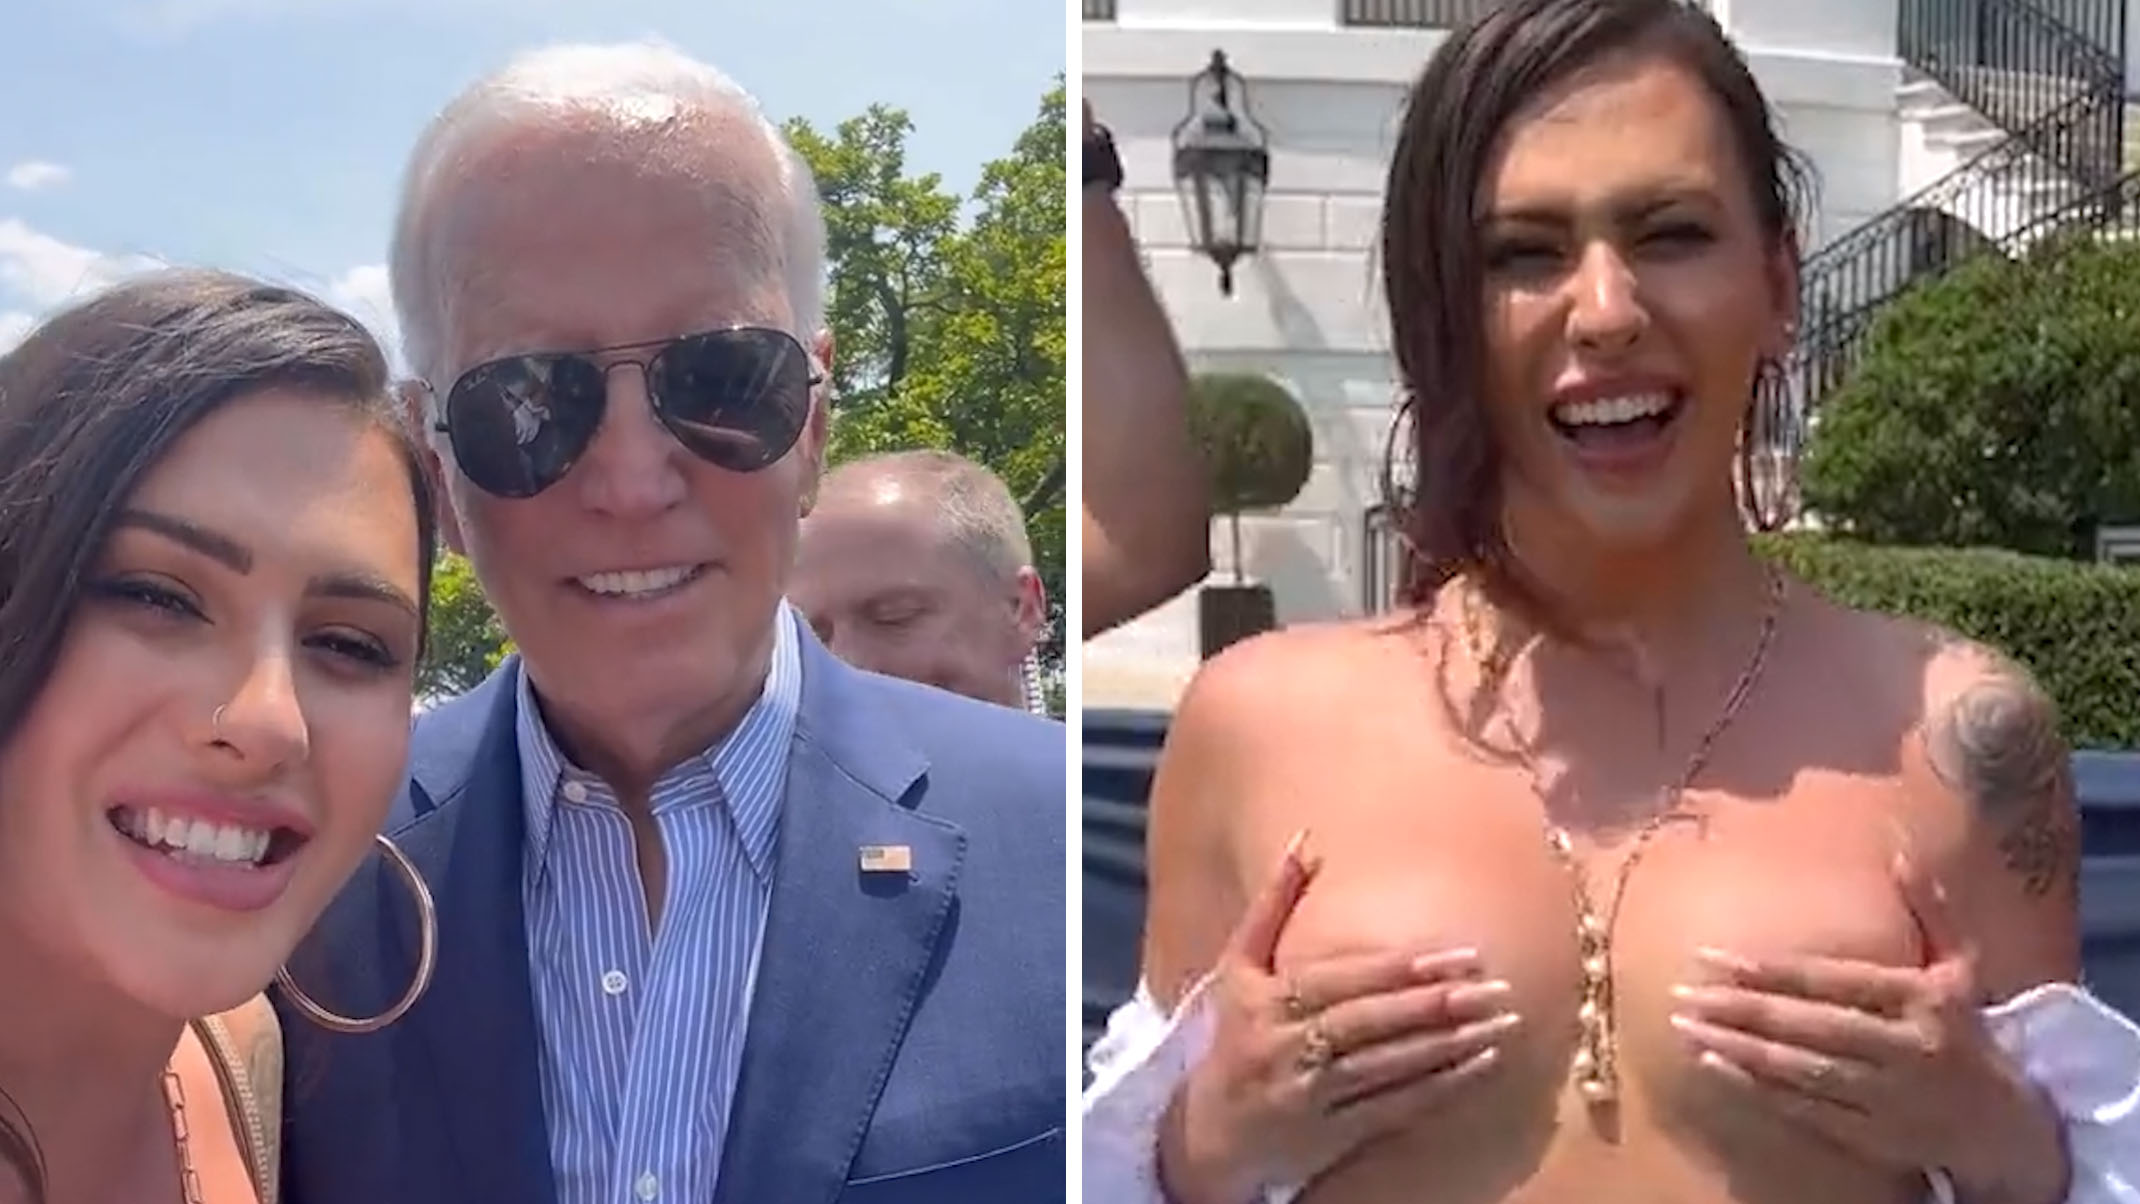 Biden administration angry over topless transgender activist at White House.